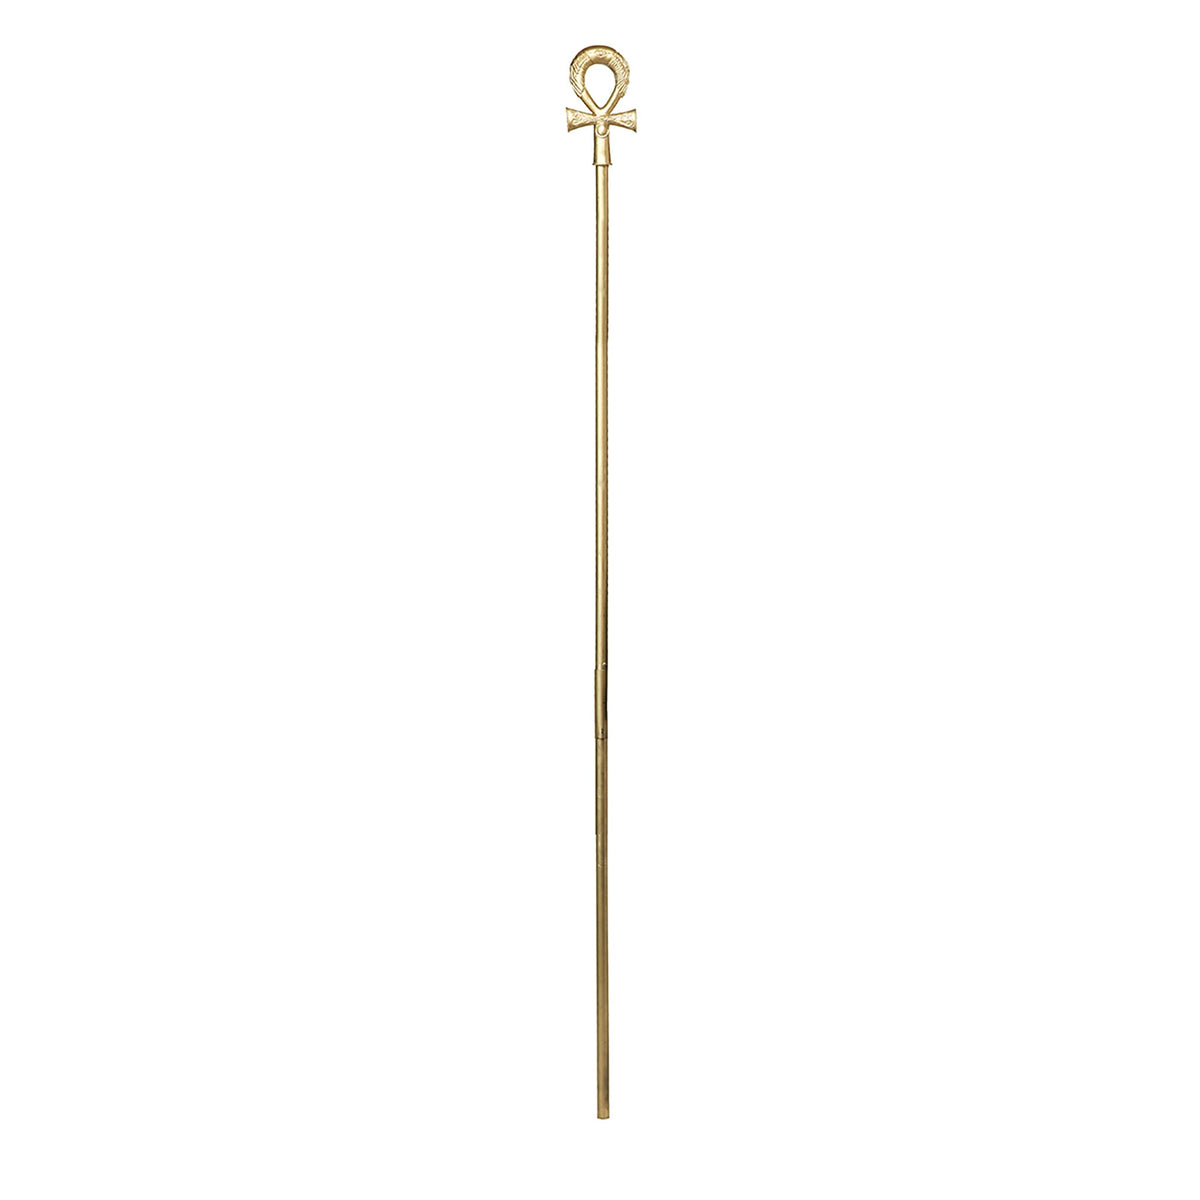 HALLOWEEN COSTUME CO. Costume Accessories Gold Egyptian Staff, 66 Inches, 1 Count